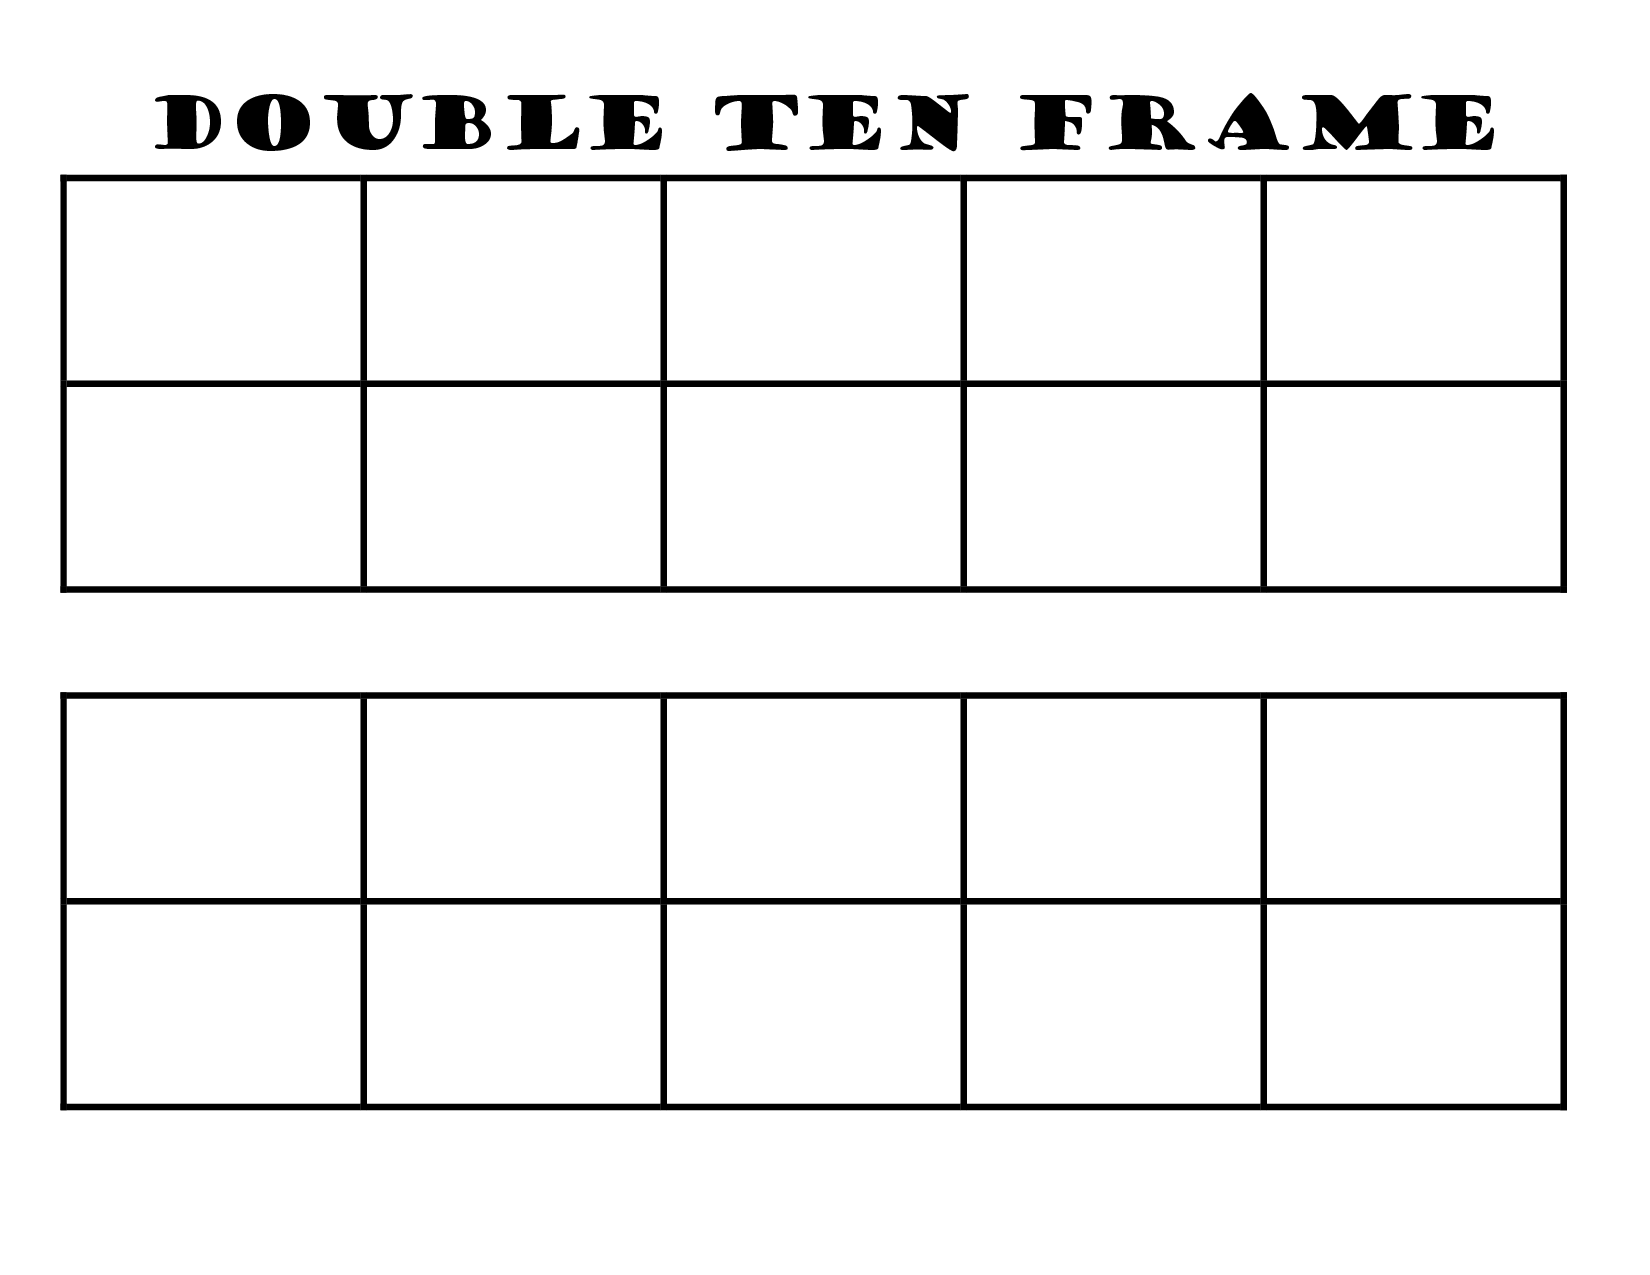 8-best-images-of-double-ten-frame-template-printable-blank-double-ten